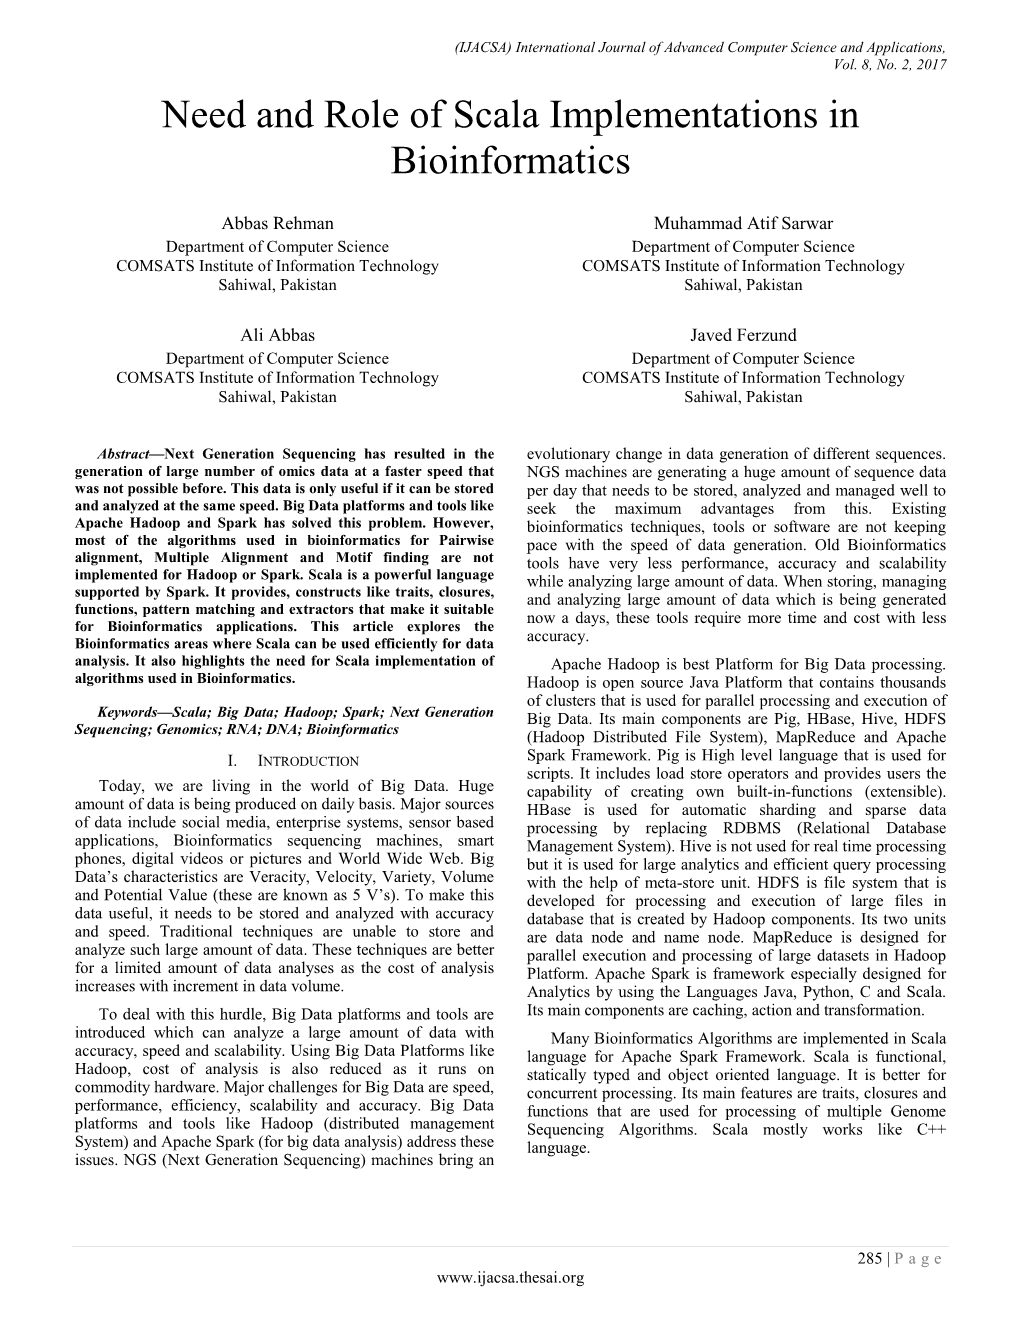 Need and Role of Scala Implementations in Bioinformatics